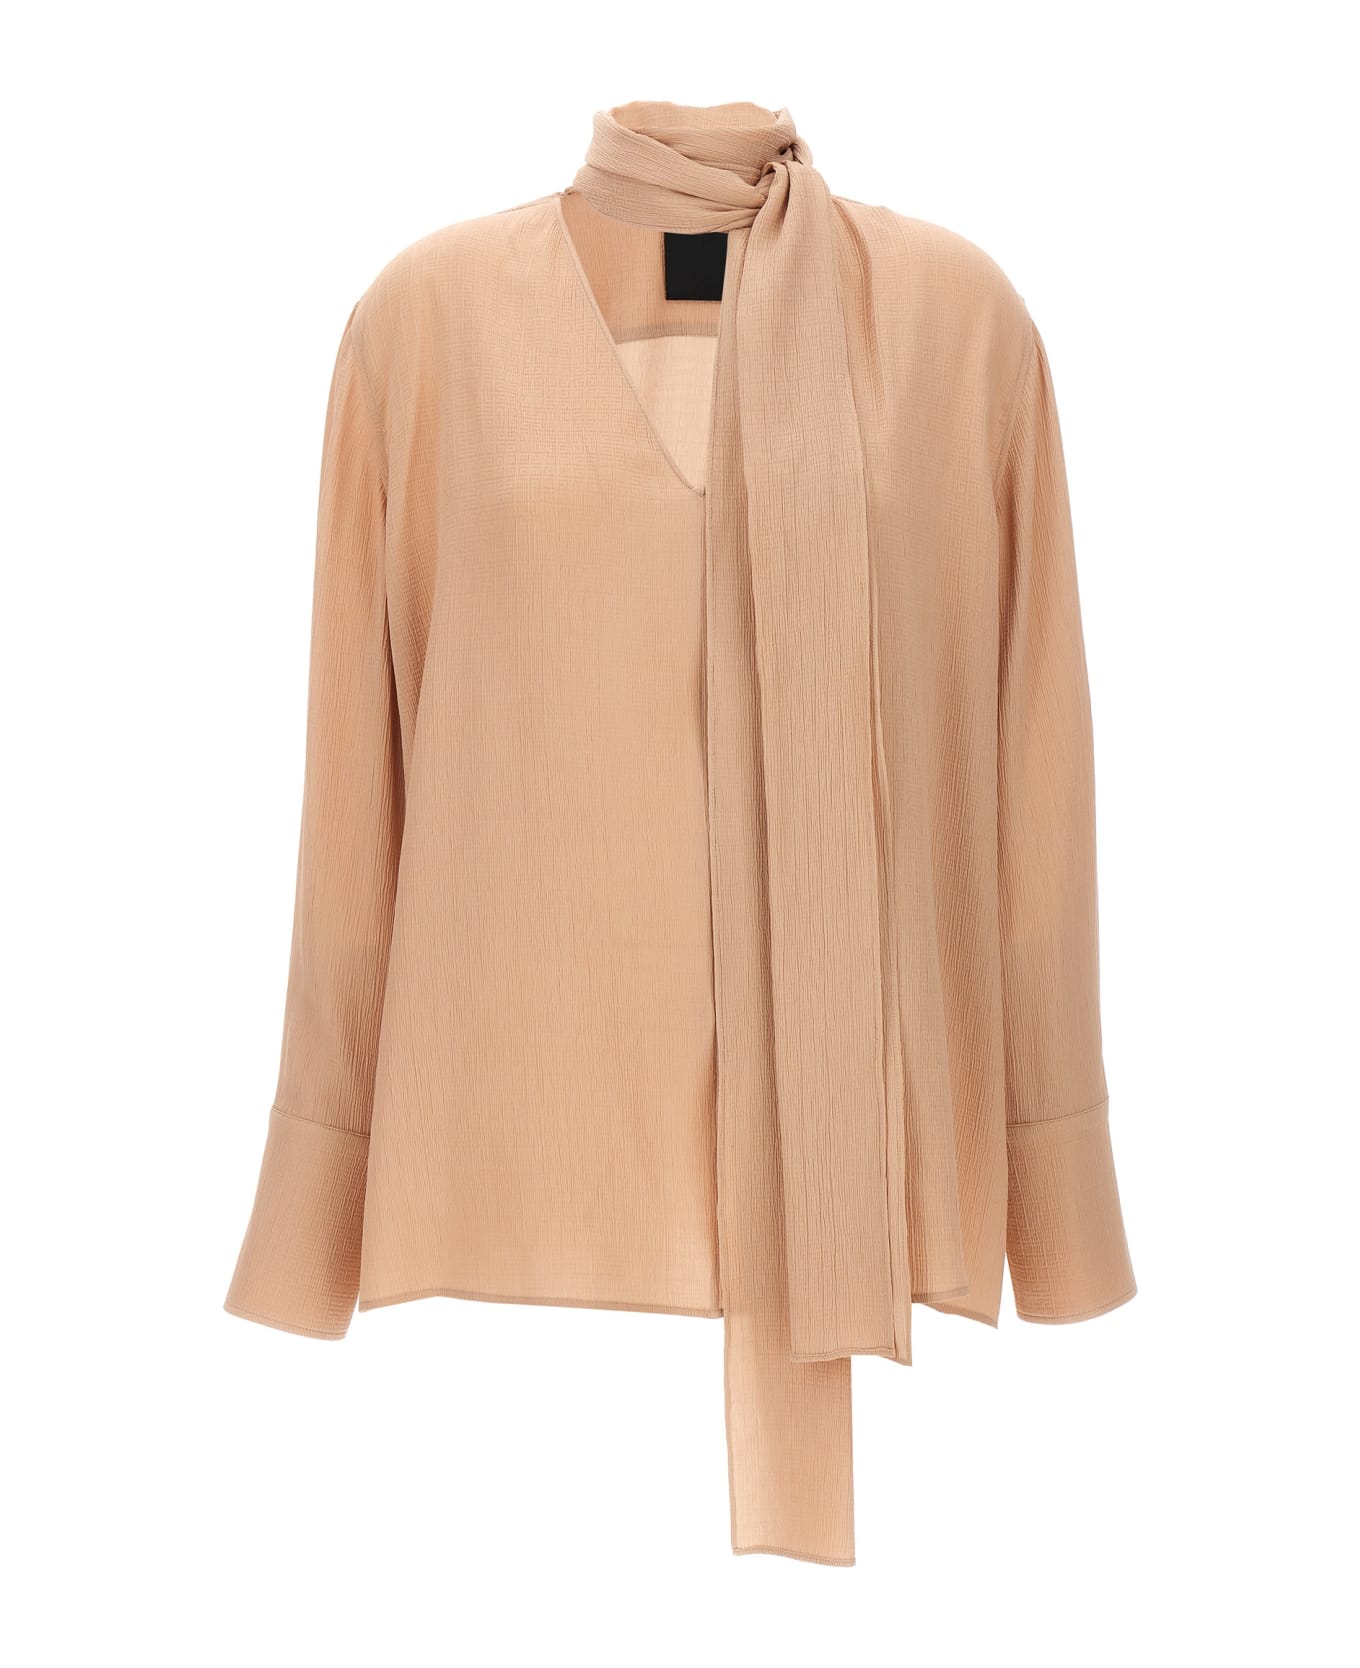 Givenchy Pussy Bow Blouse - Beige